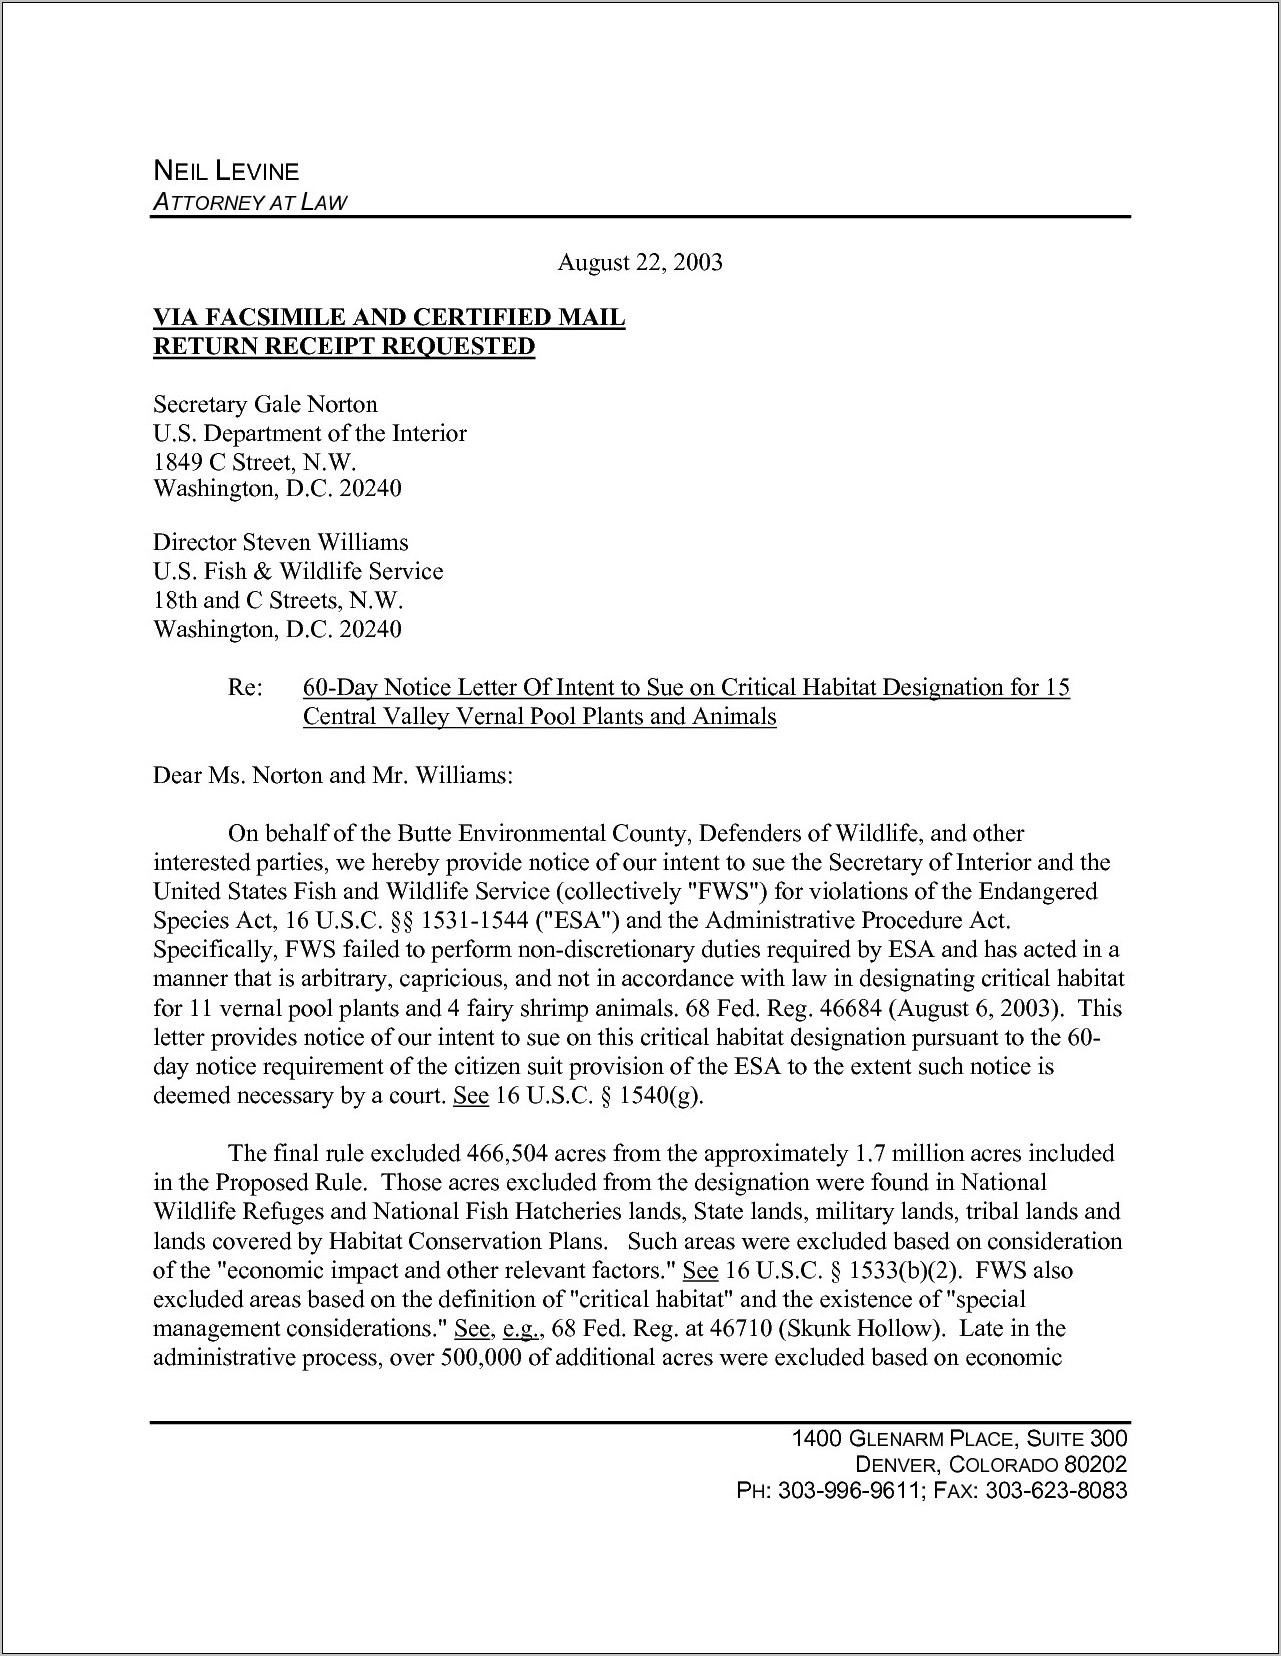 Sample Legal Letter Of Intent To Sue